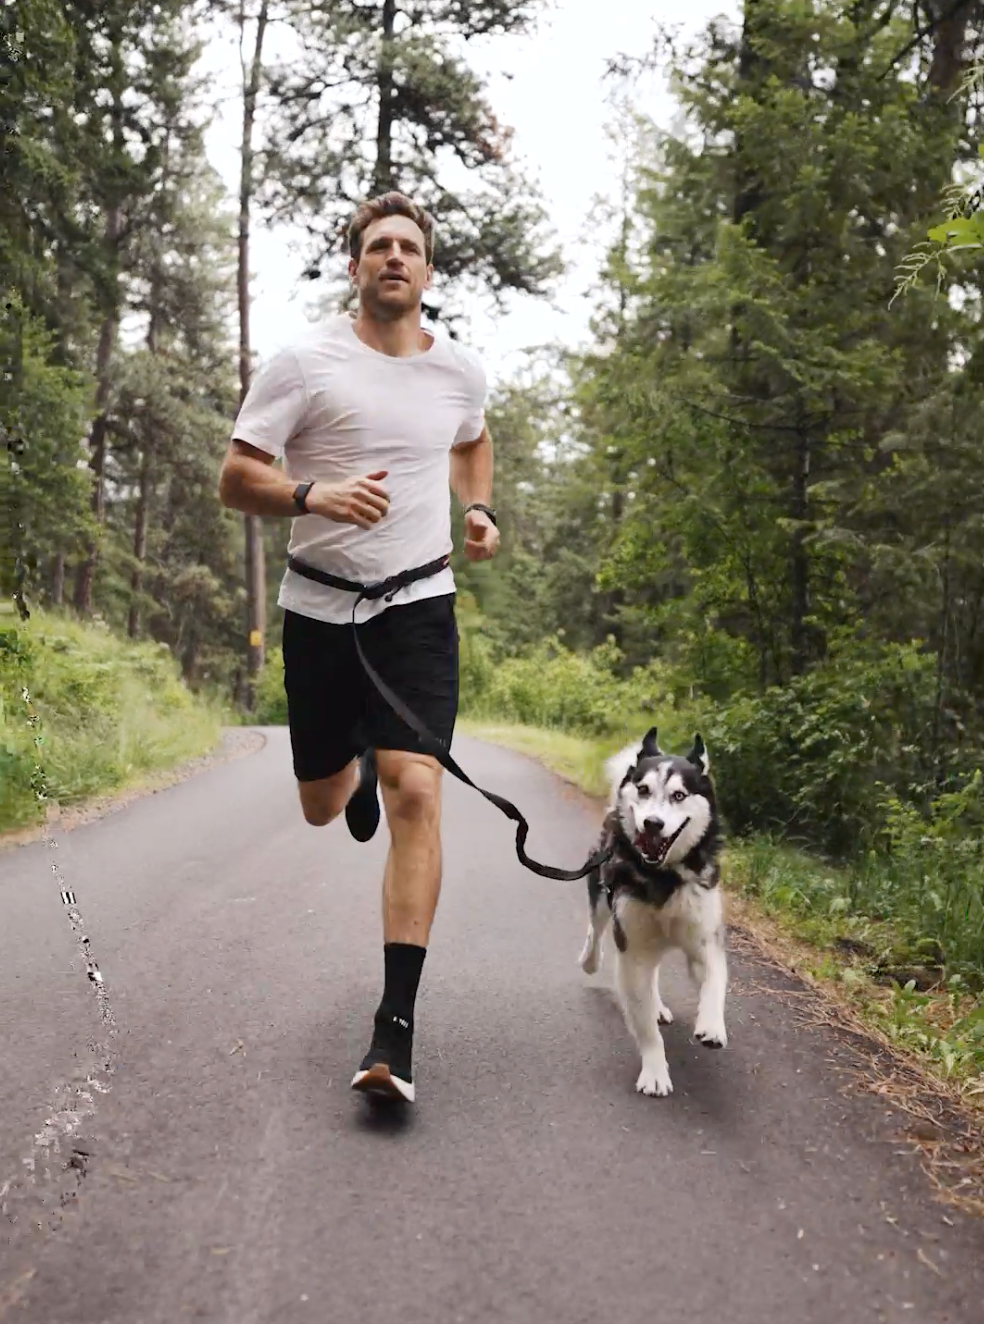 A woman runs alongside her dog on a leash, demonstration how goals for dogs and you can be achieved!